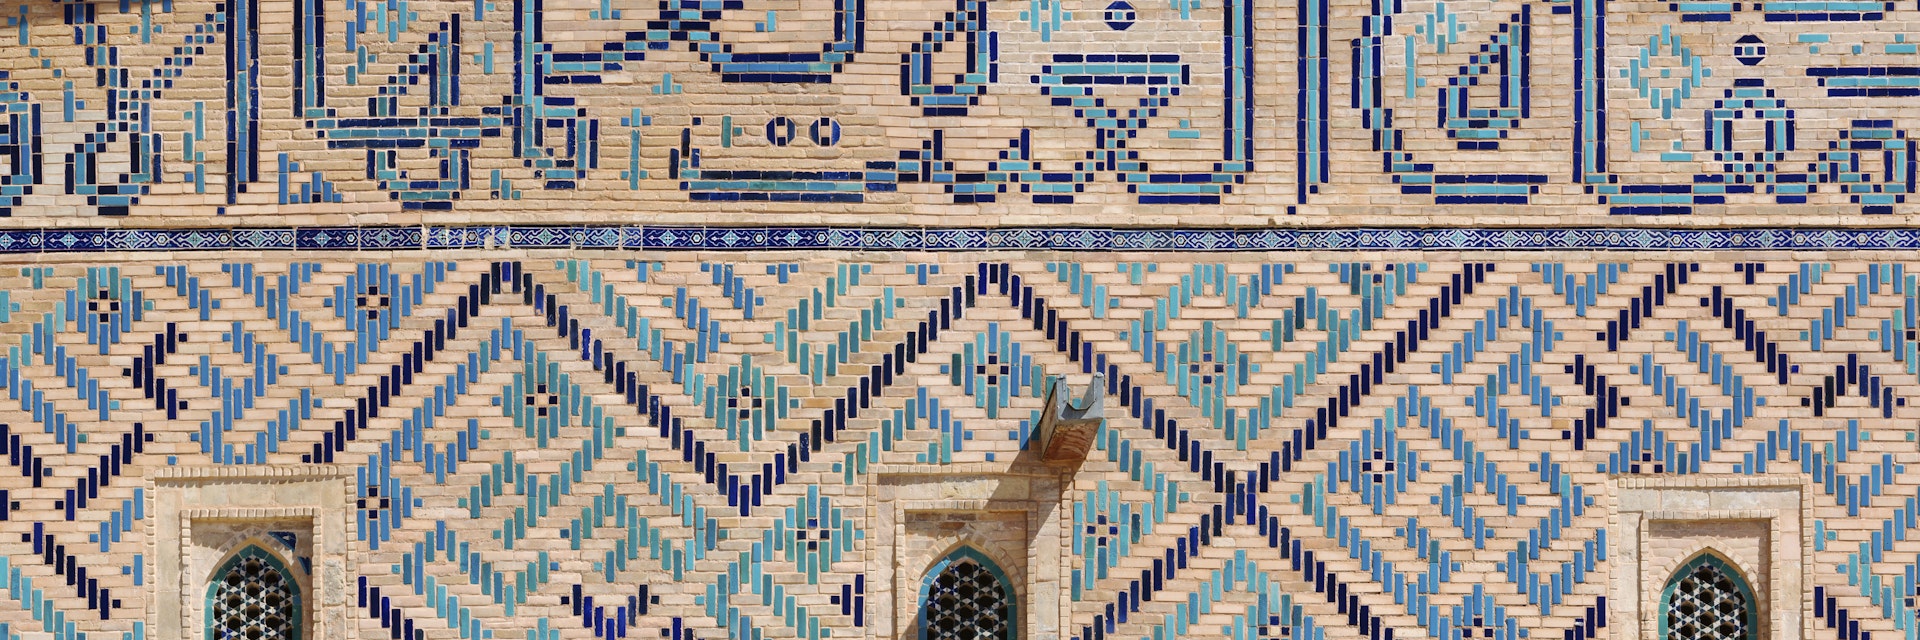 Windows and Outer Wall of Khoja Ahmed Yasawi's Mausoleum